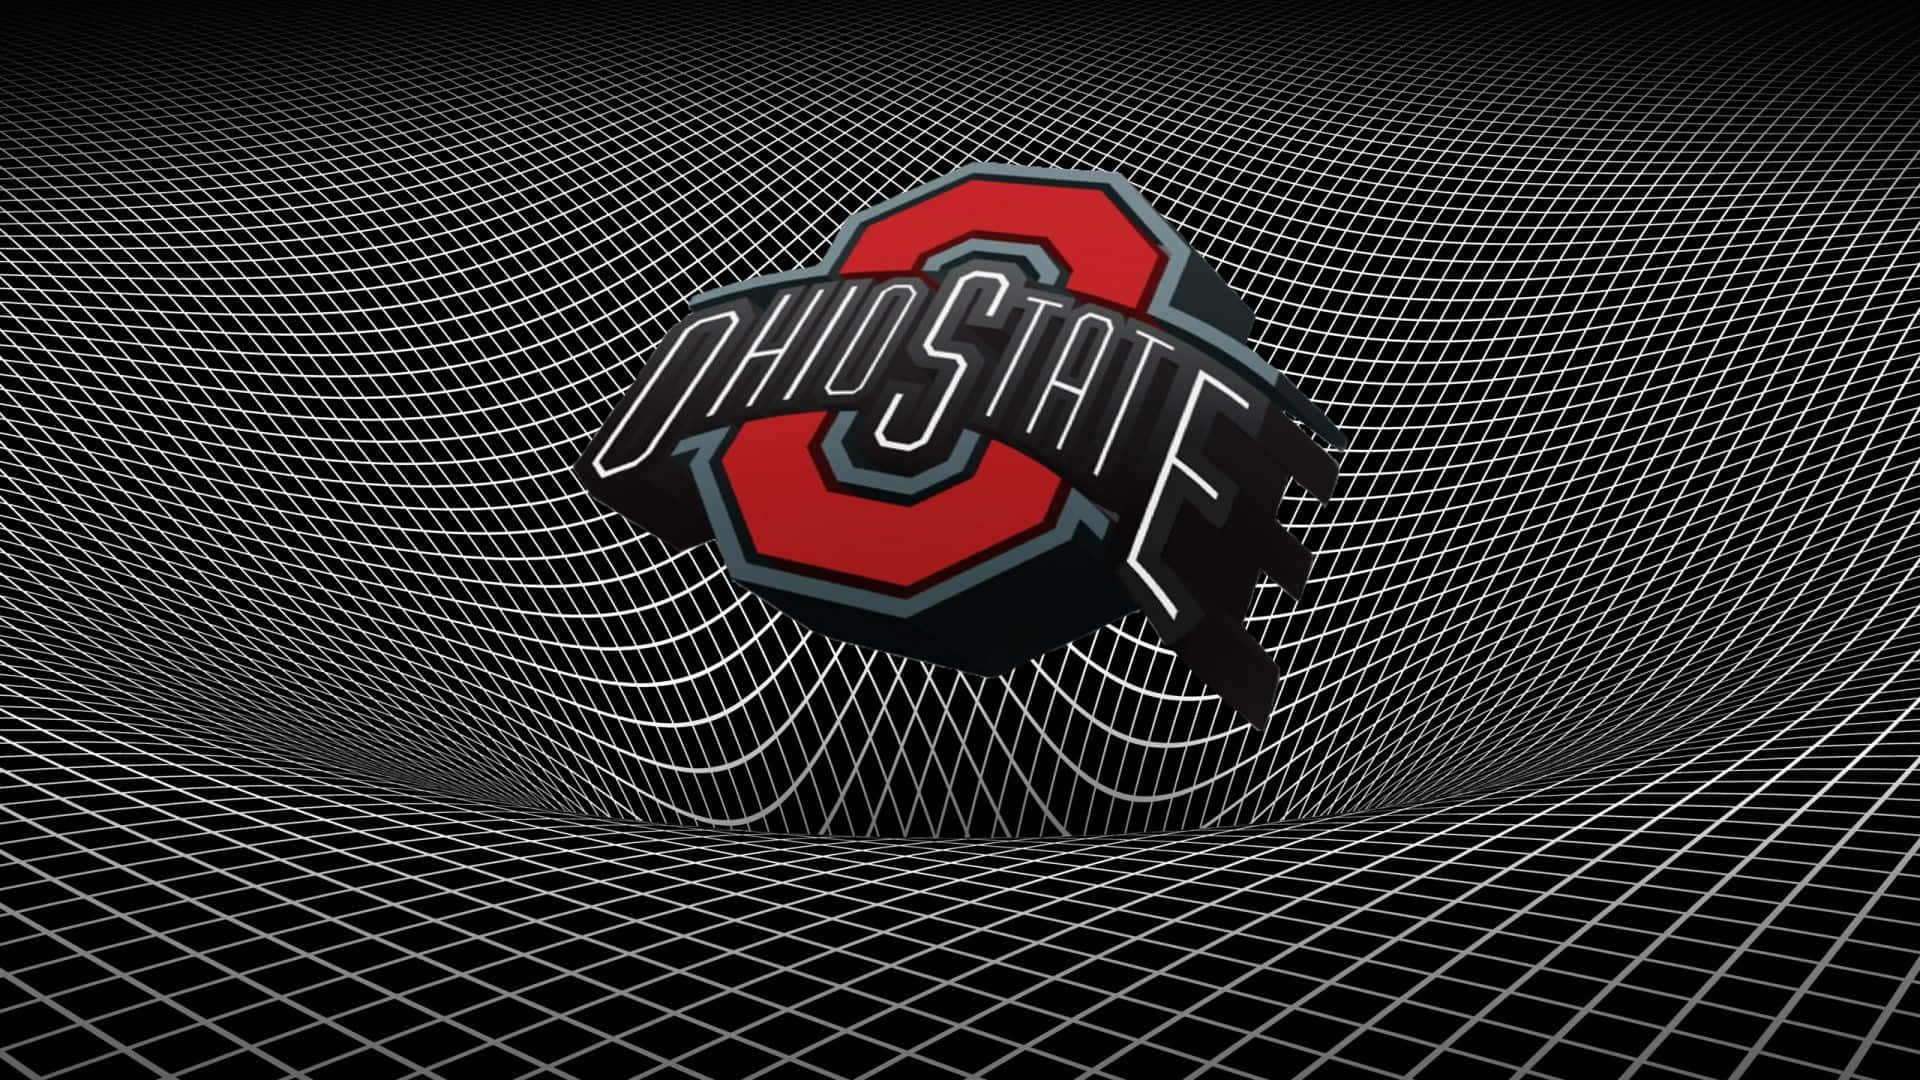 Show your pride and rep your state with the cool Ohio State logo! Wallpaper